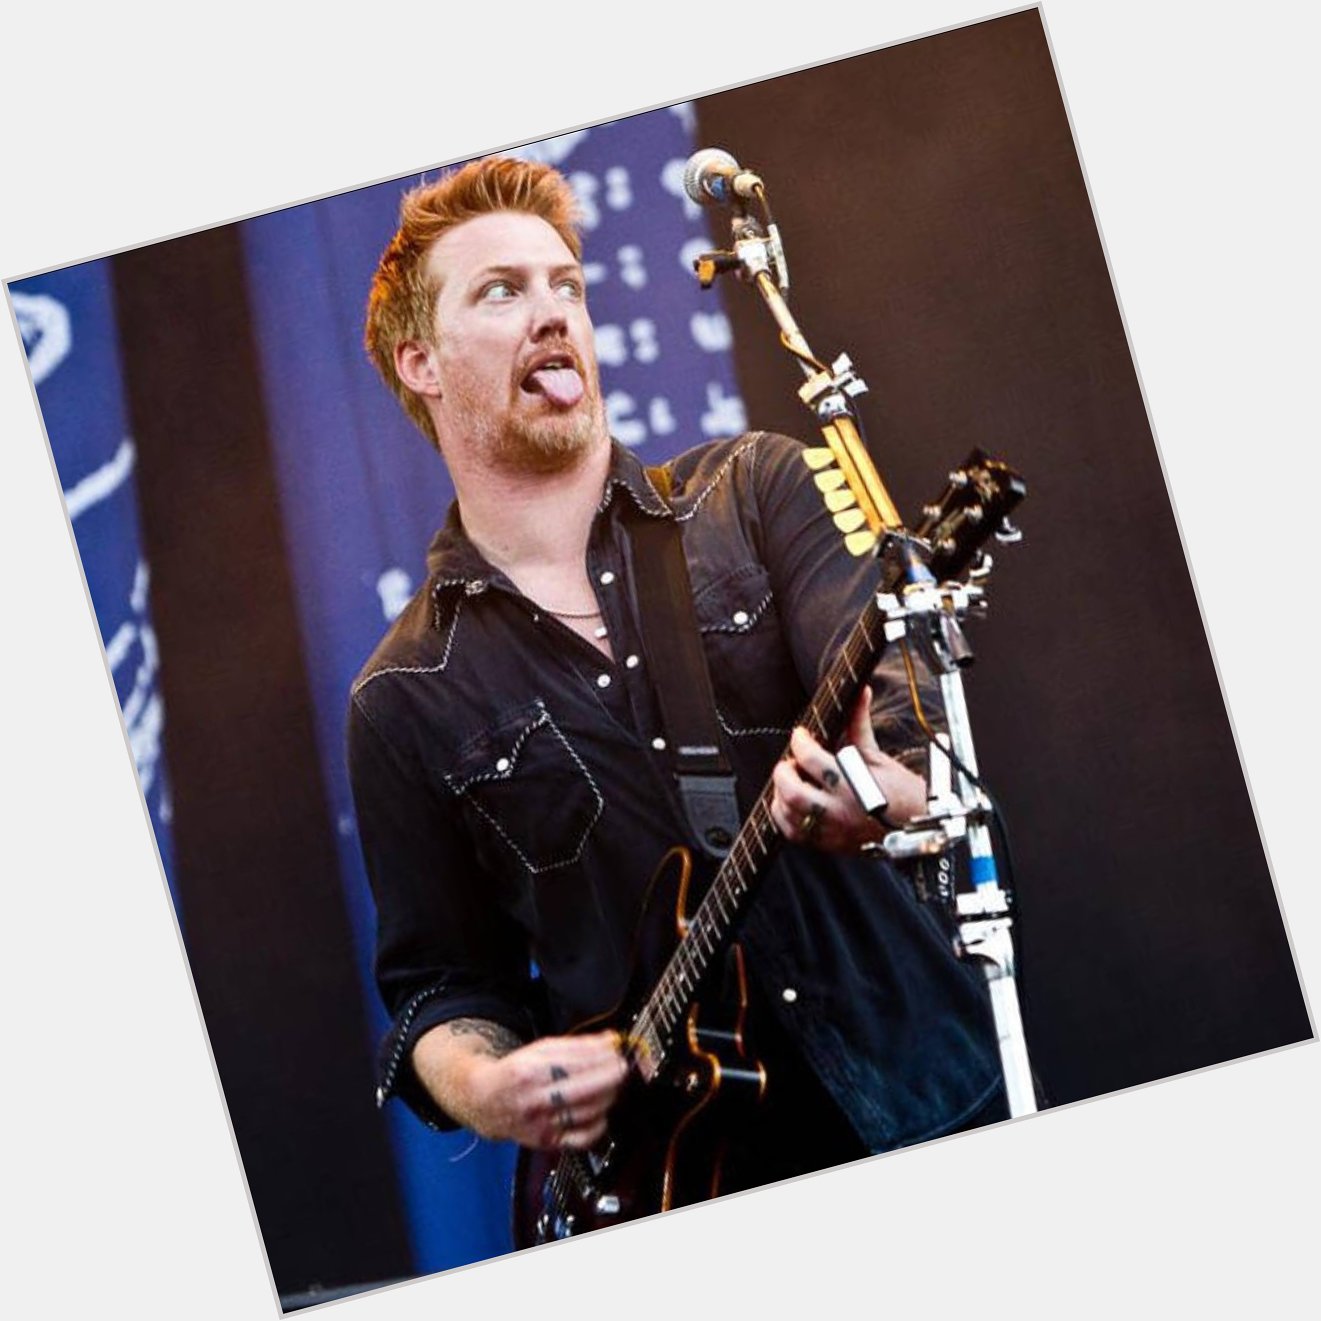 Happy birthday to Ginger General Josh Homme       